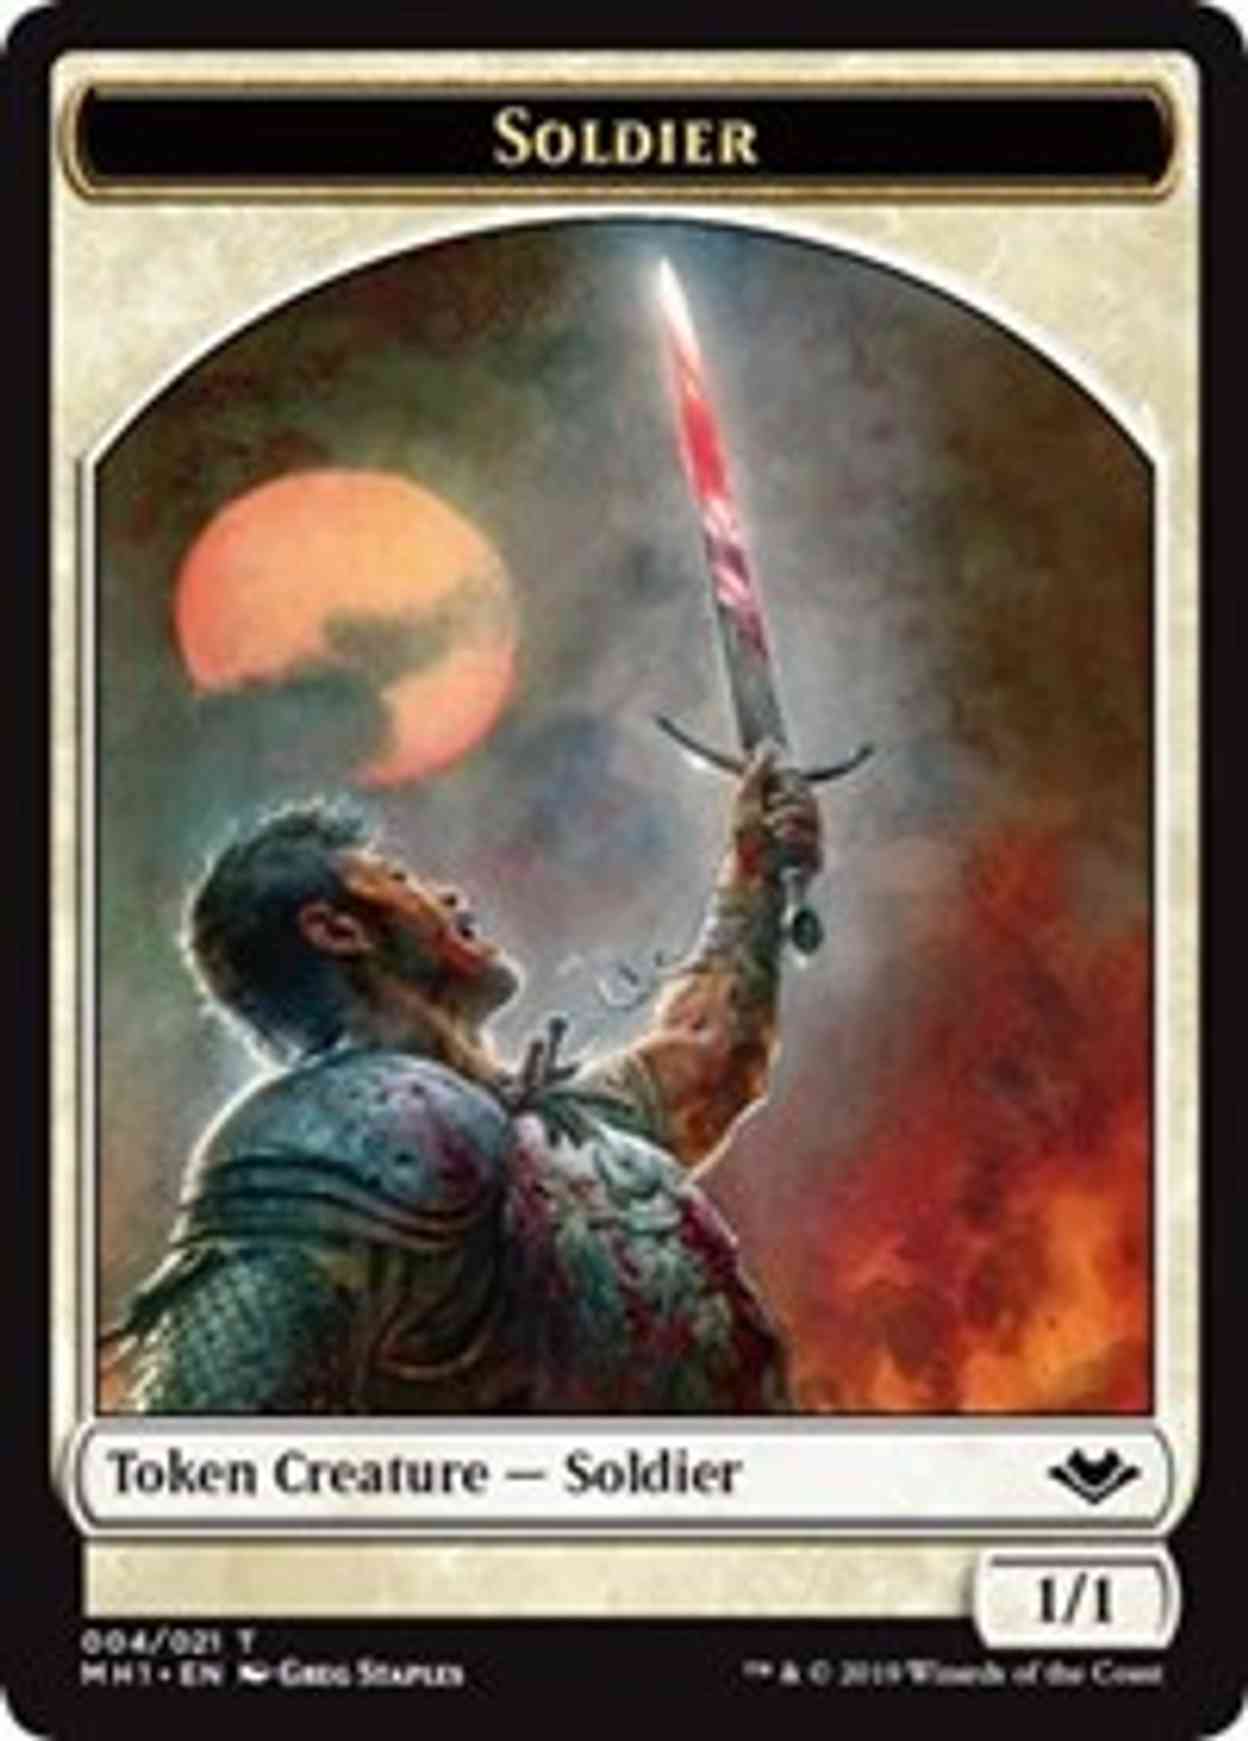 Soldier (004) // Spider (014) Double-sided Token magic card front